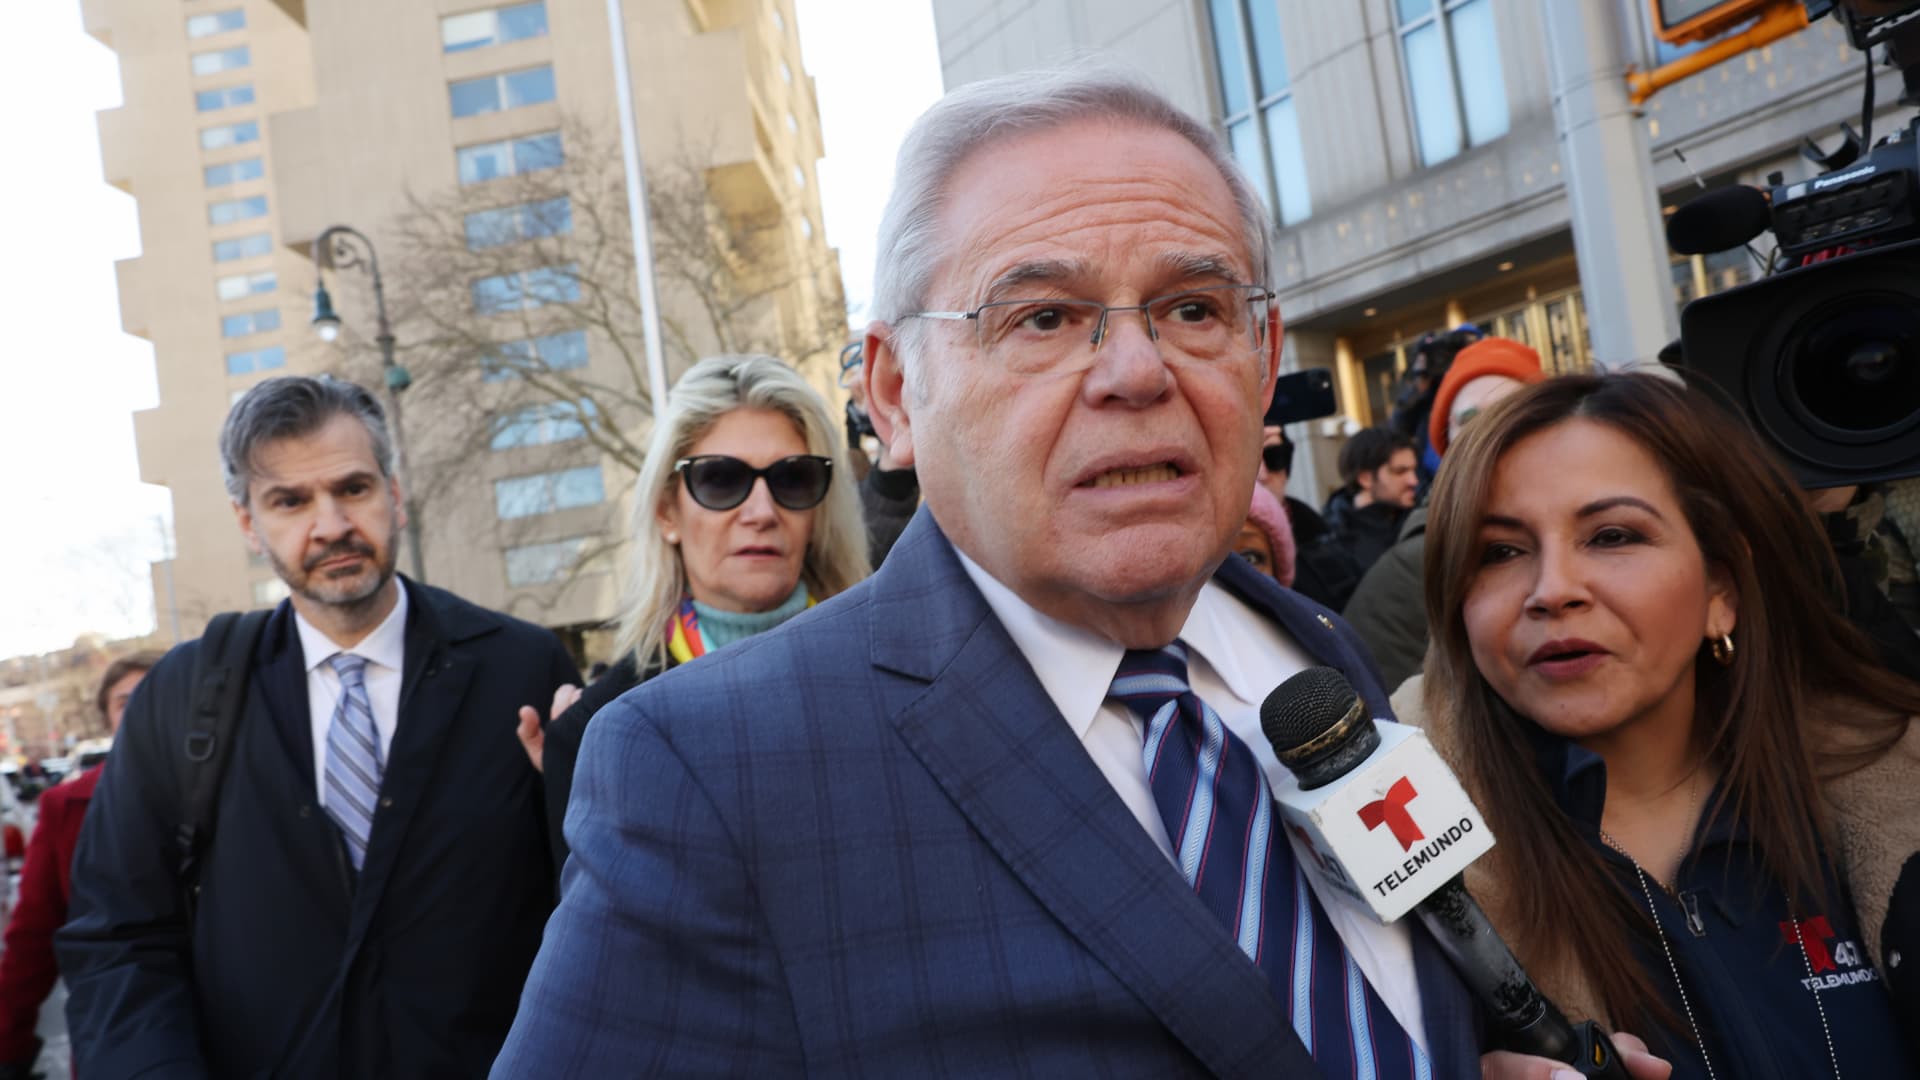 Sen. Bob Menendez grills Treasury official on curbing illicit finance a month before bribery trial